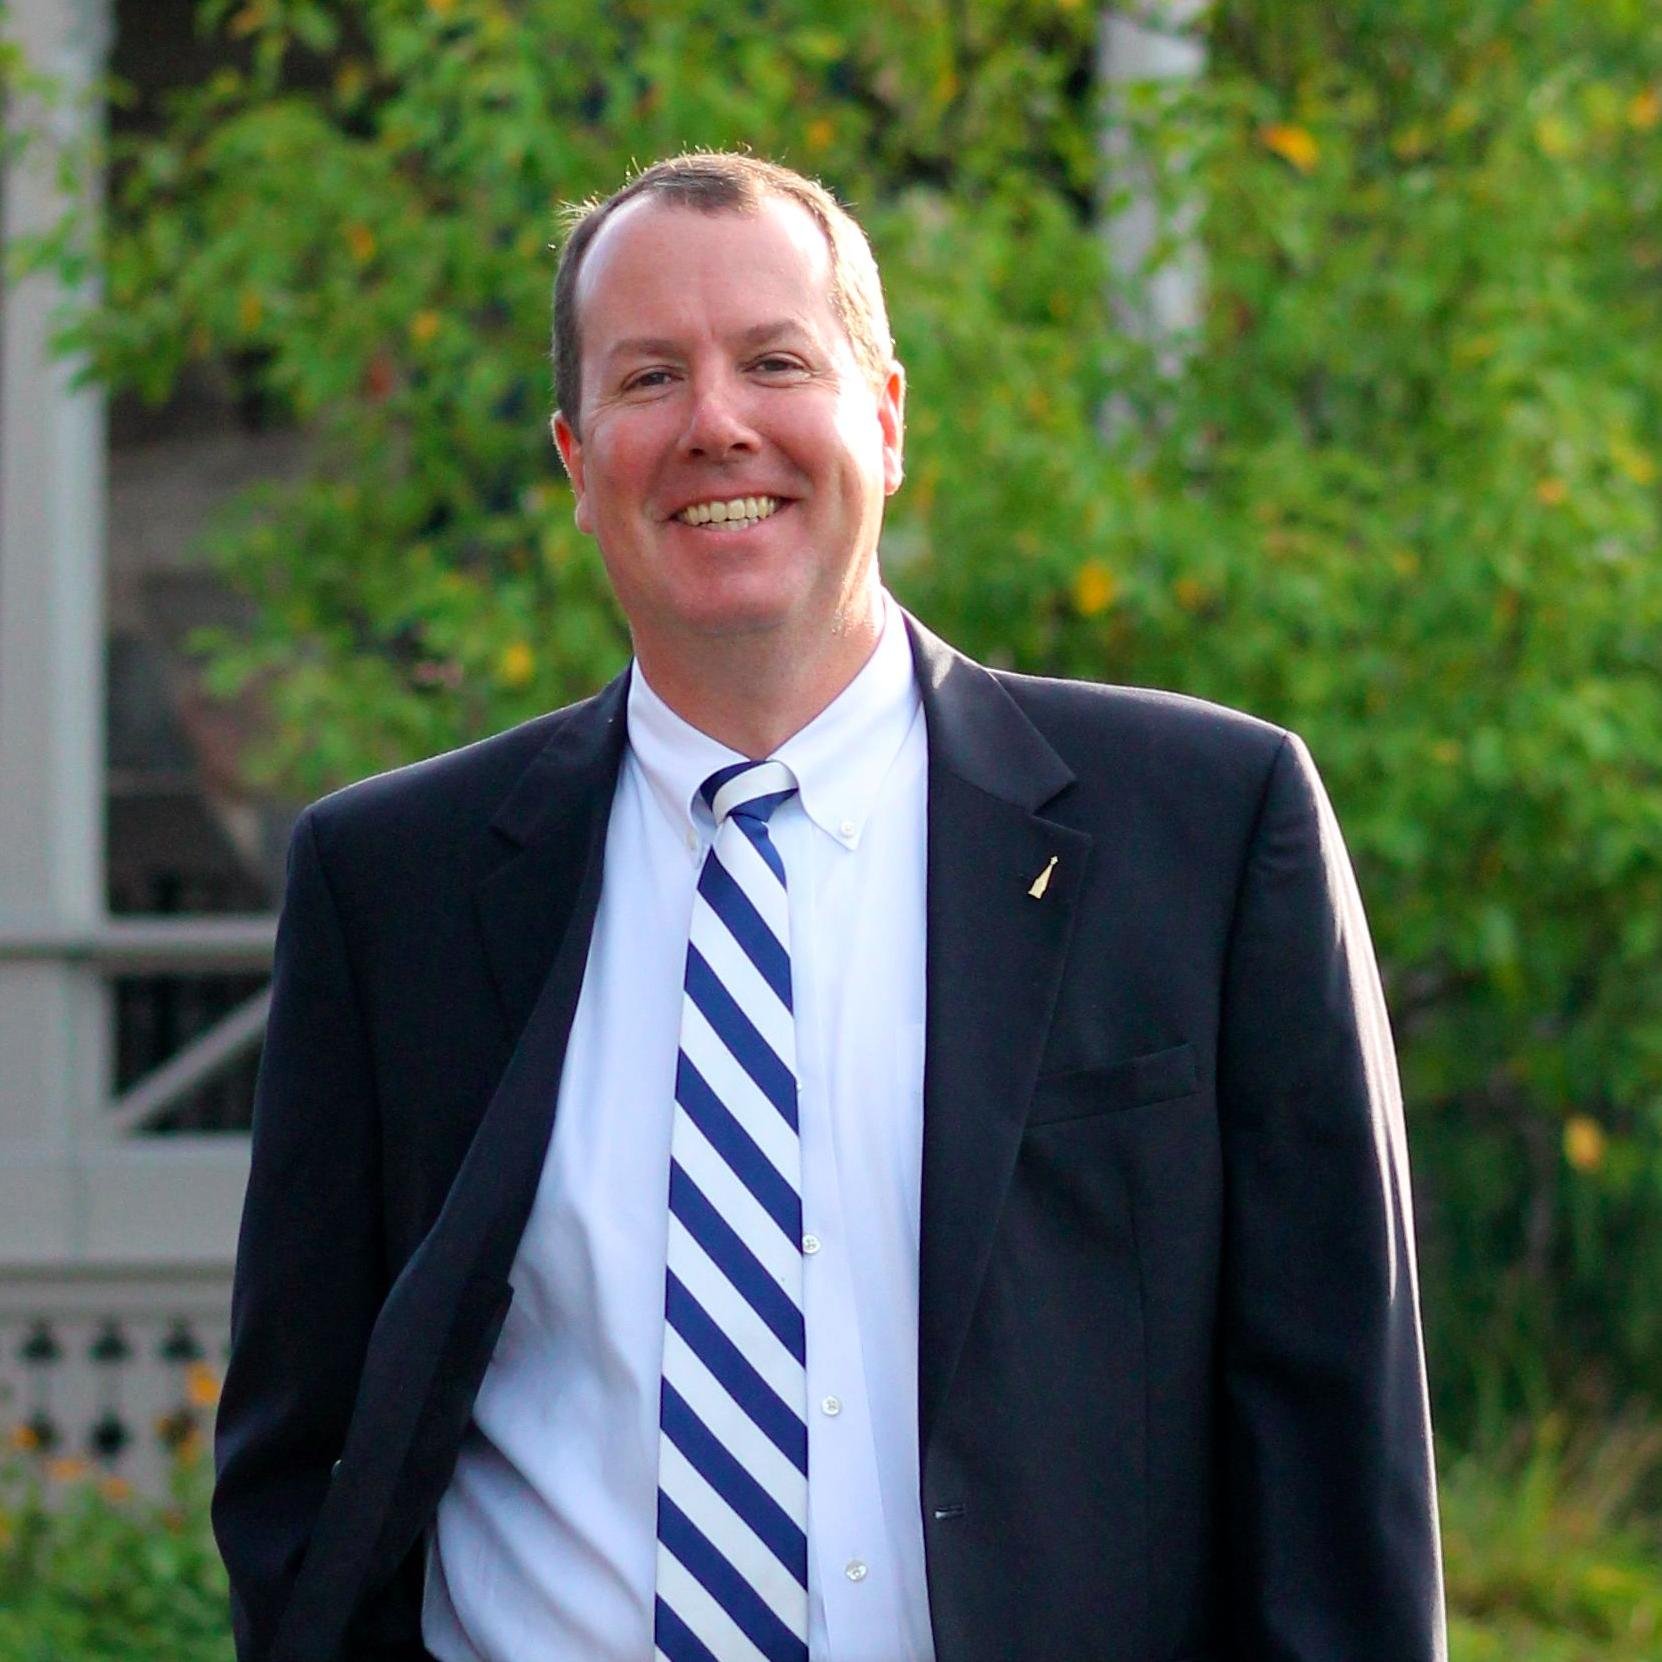 Husband, Father and Head of School at St. John's Prep, Danvers, MA